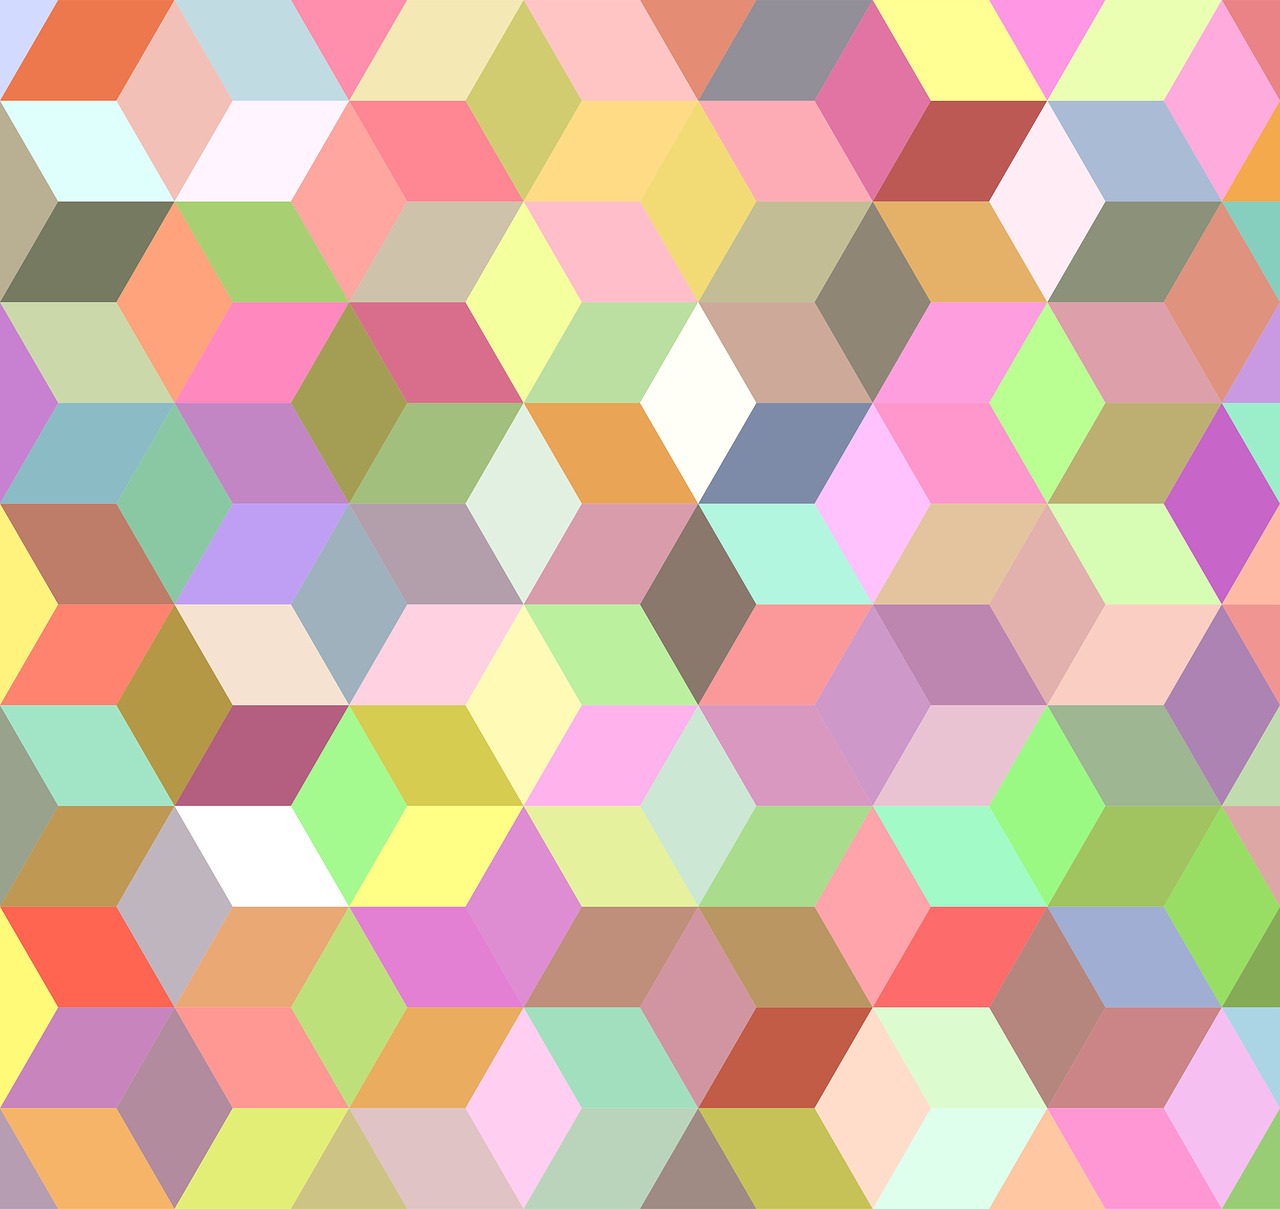 Mosiac of various colors in a cubed design.